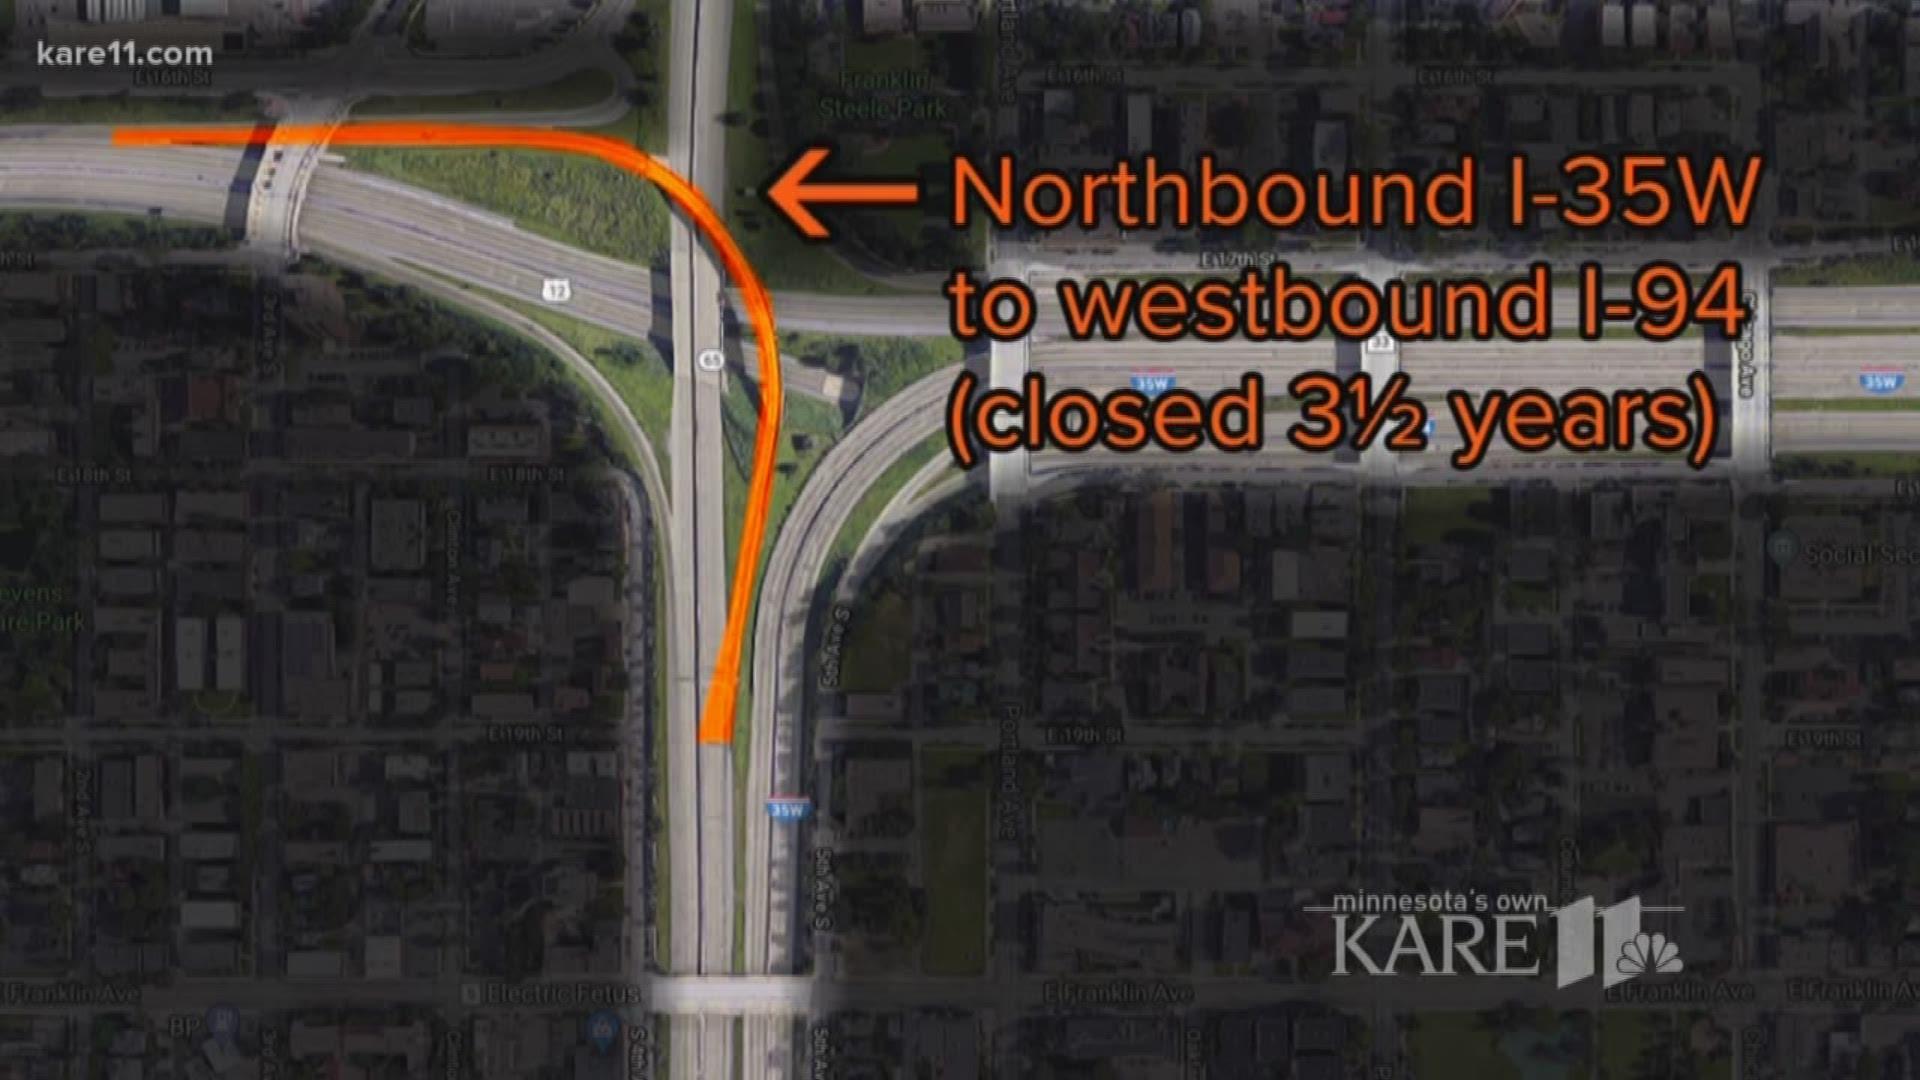 This weekend the painting of the Whitney pedestrian bridge near the Minneapolis Sculpture Garden will force the closure of I-94 in both directions. But that's just the start... https://kare11.tv/2jmFJoh